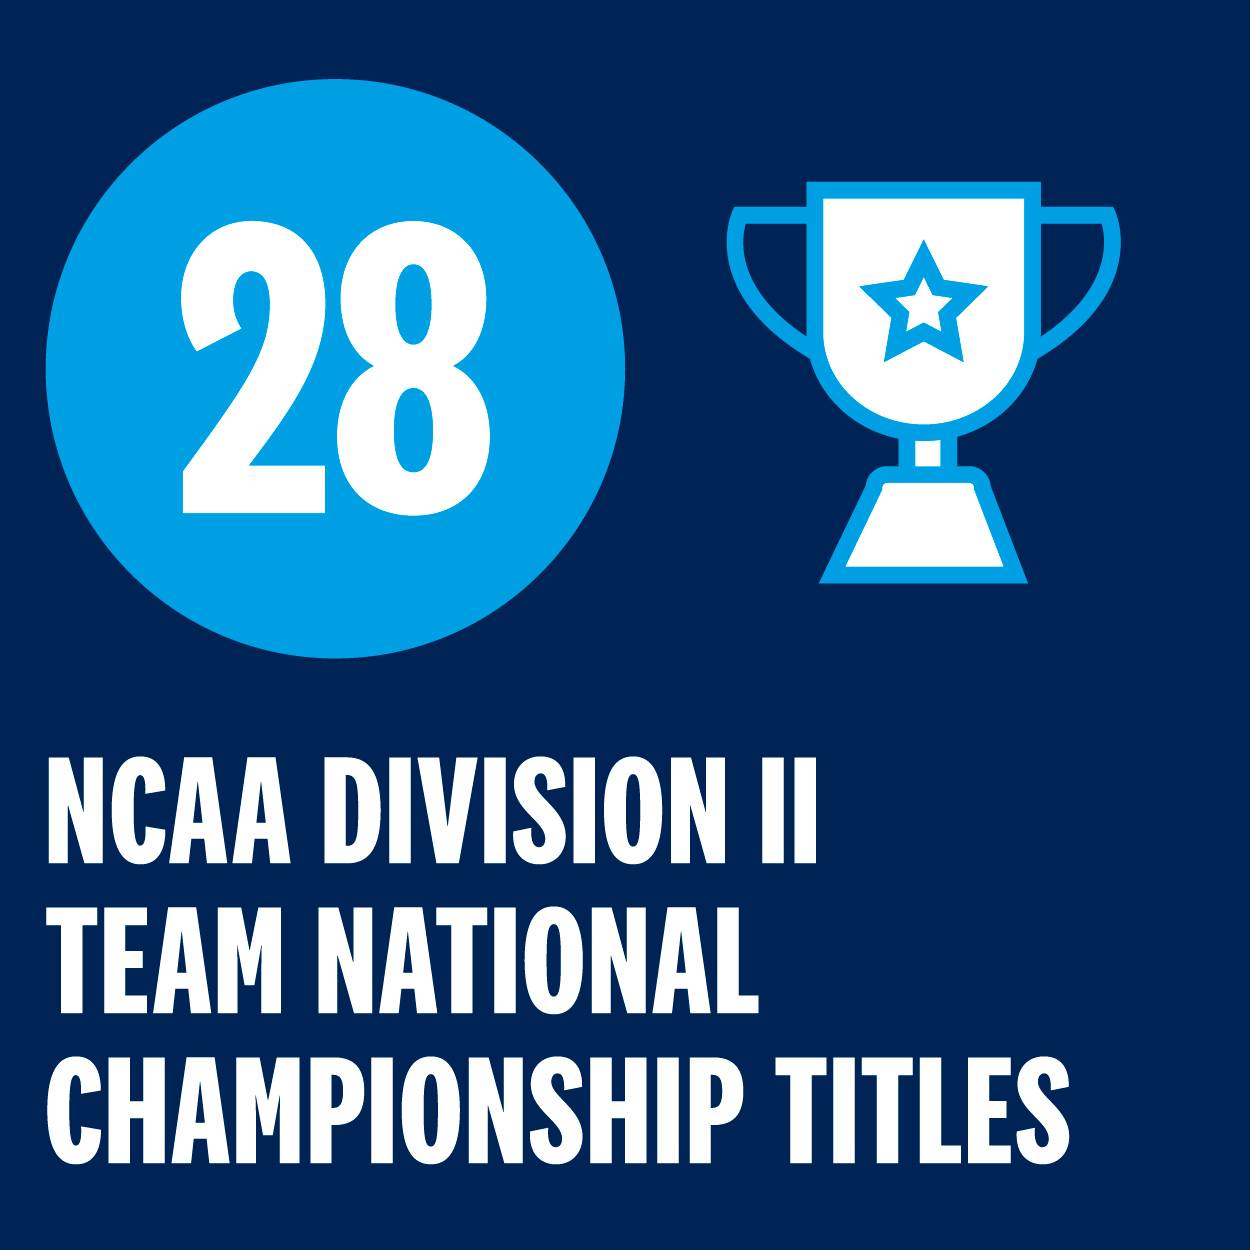 28 NCAA Division II Team National Championship Titles